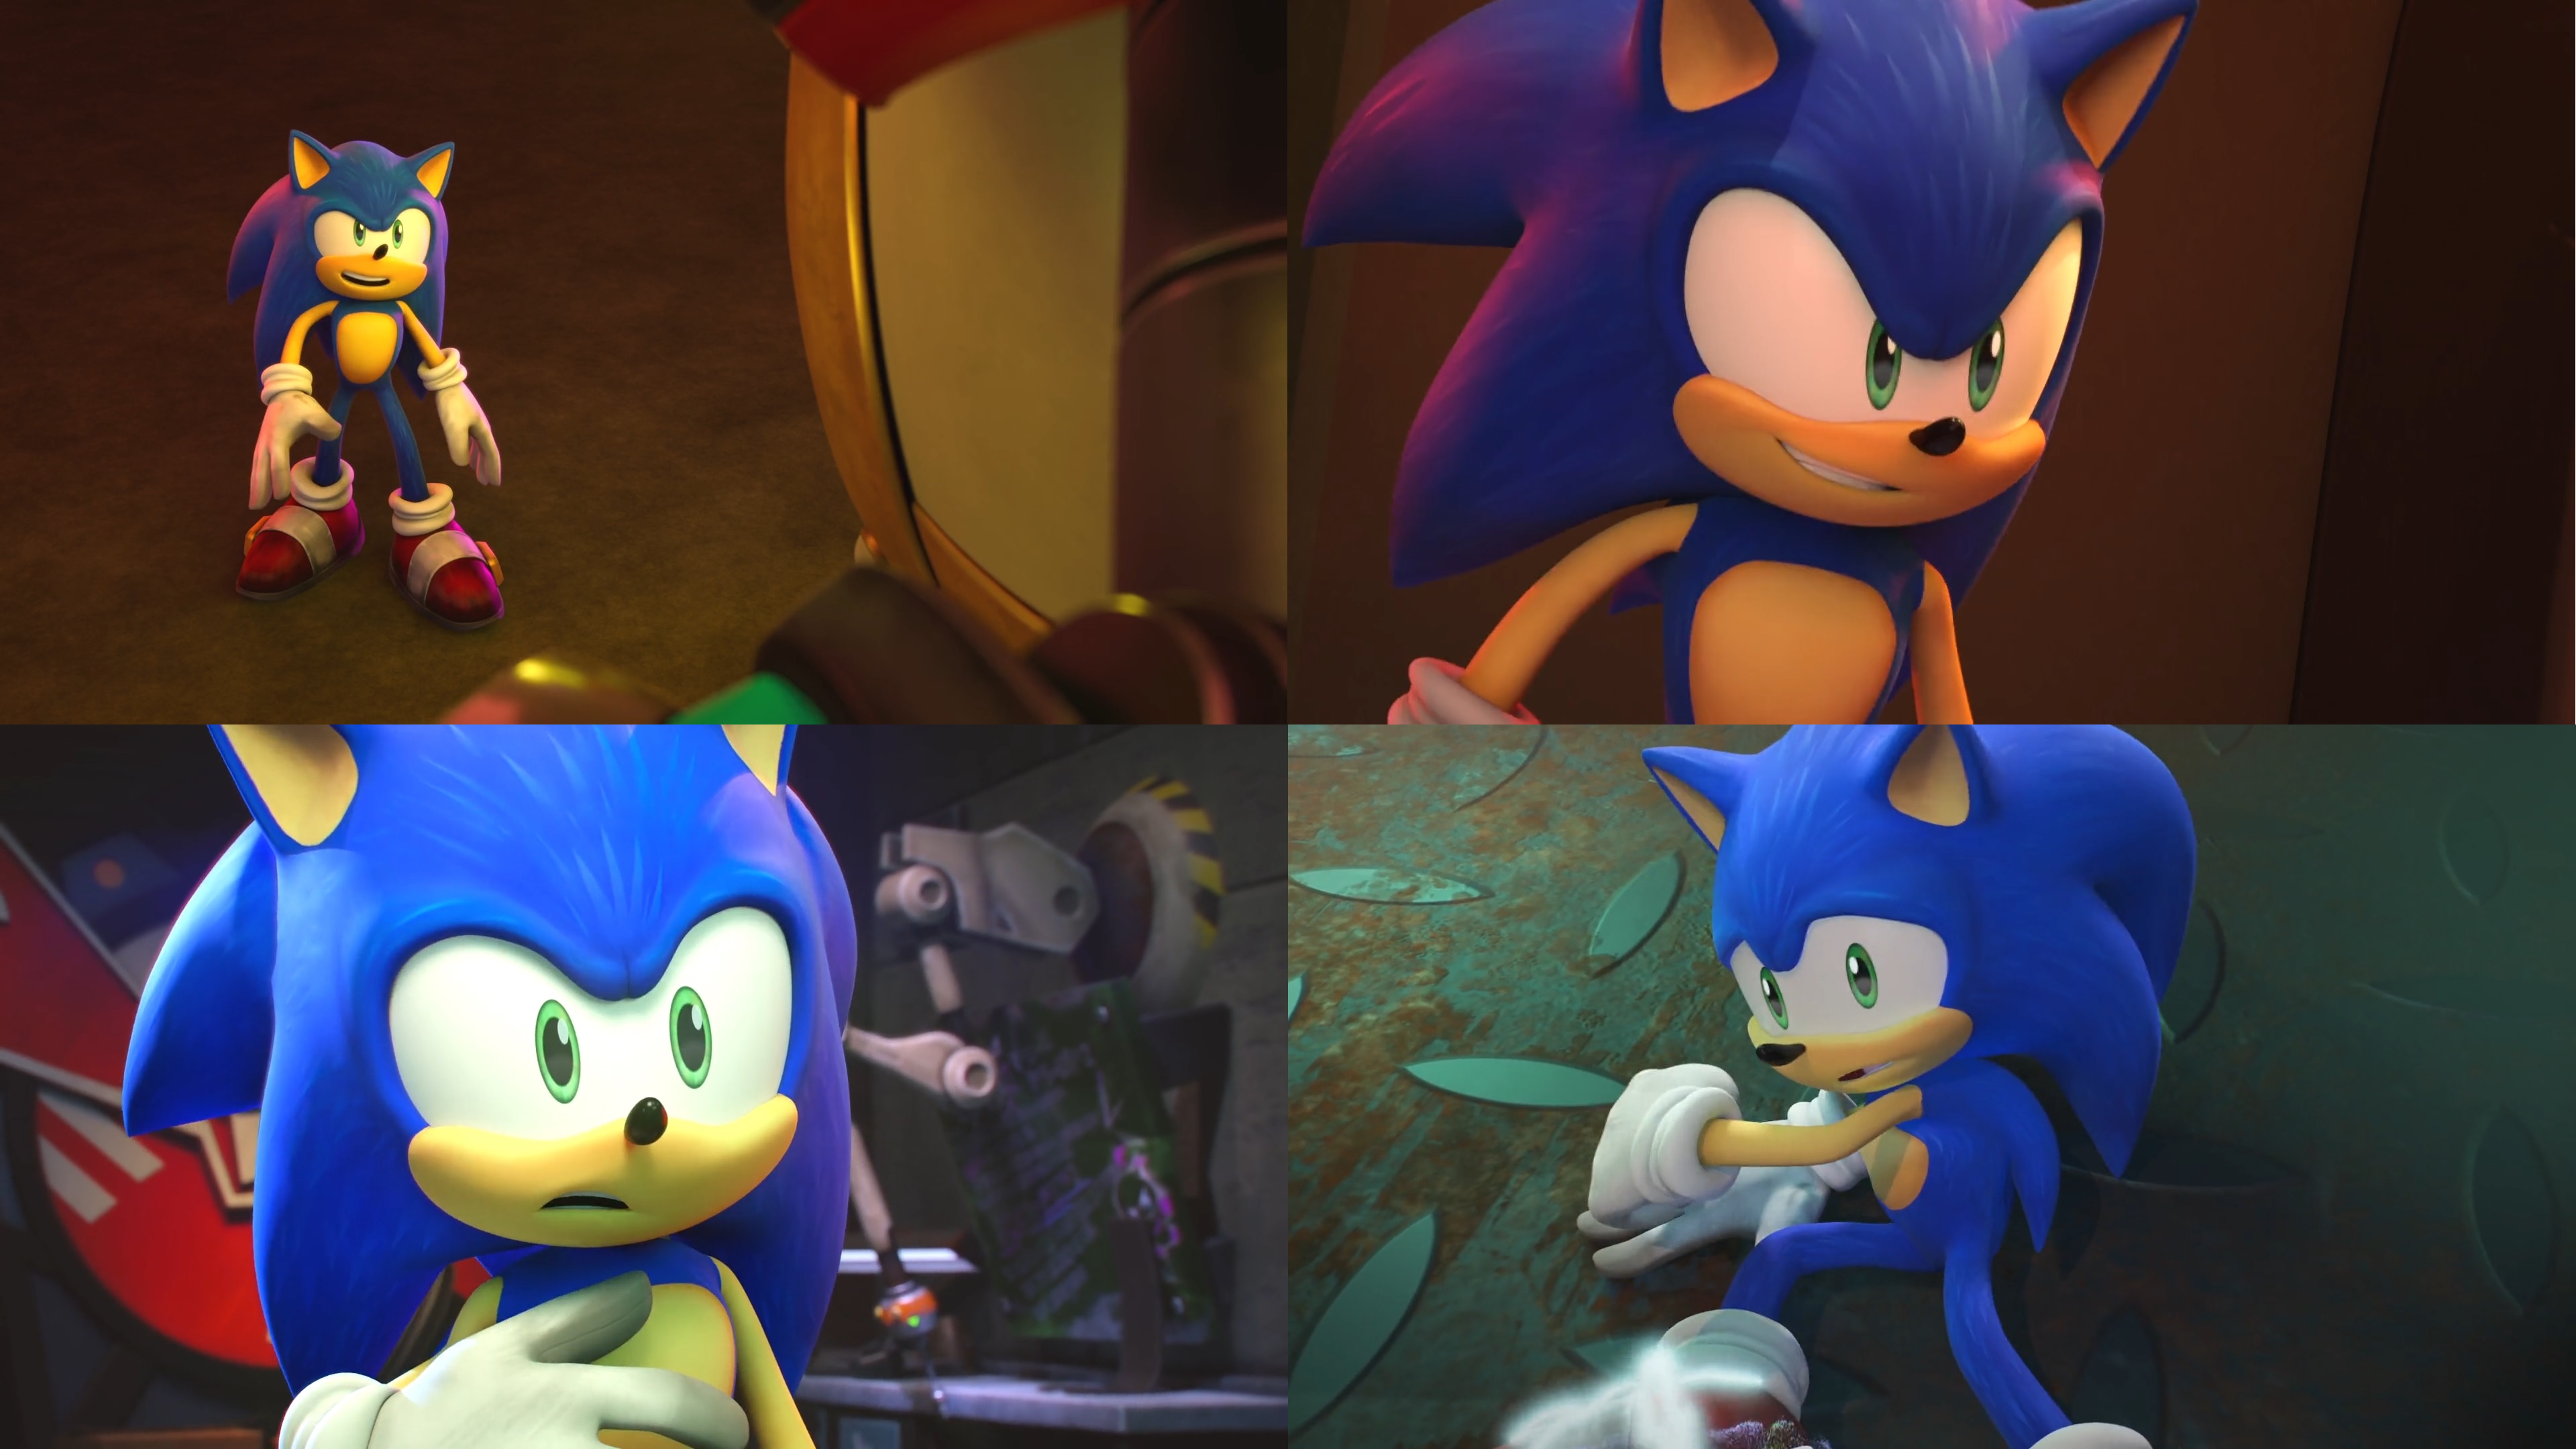 My reactions to Sonic Prime by standalonework on DeviantArt